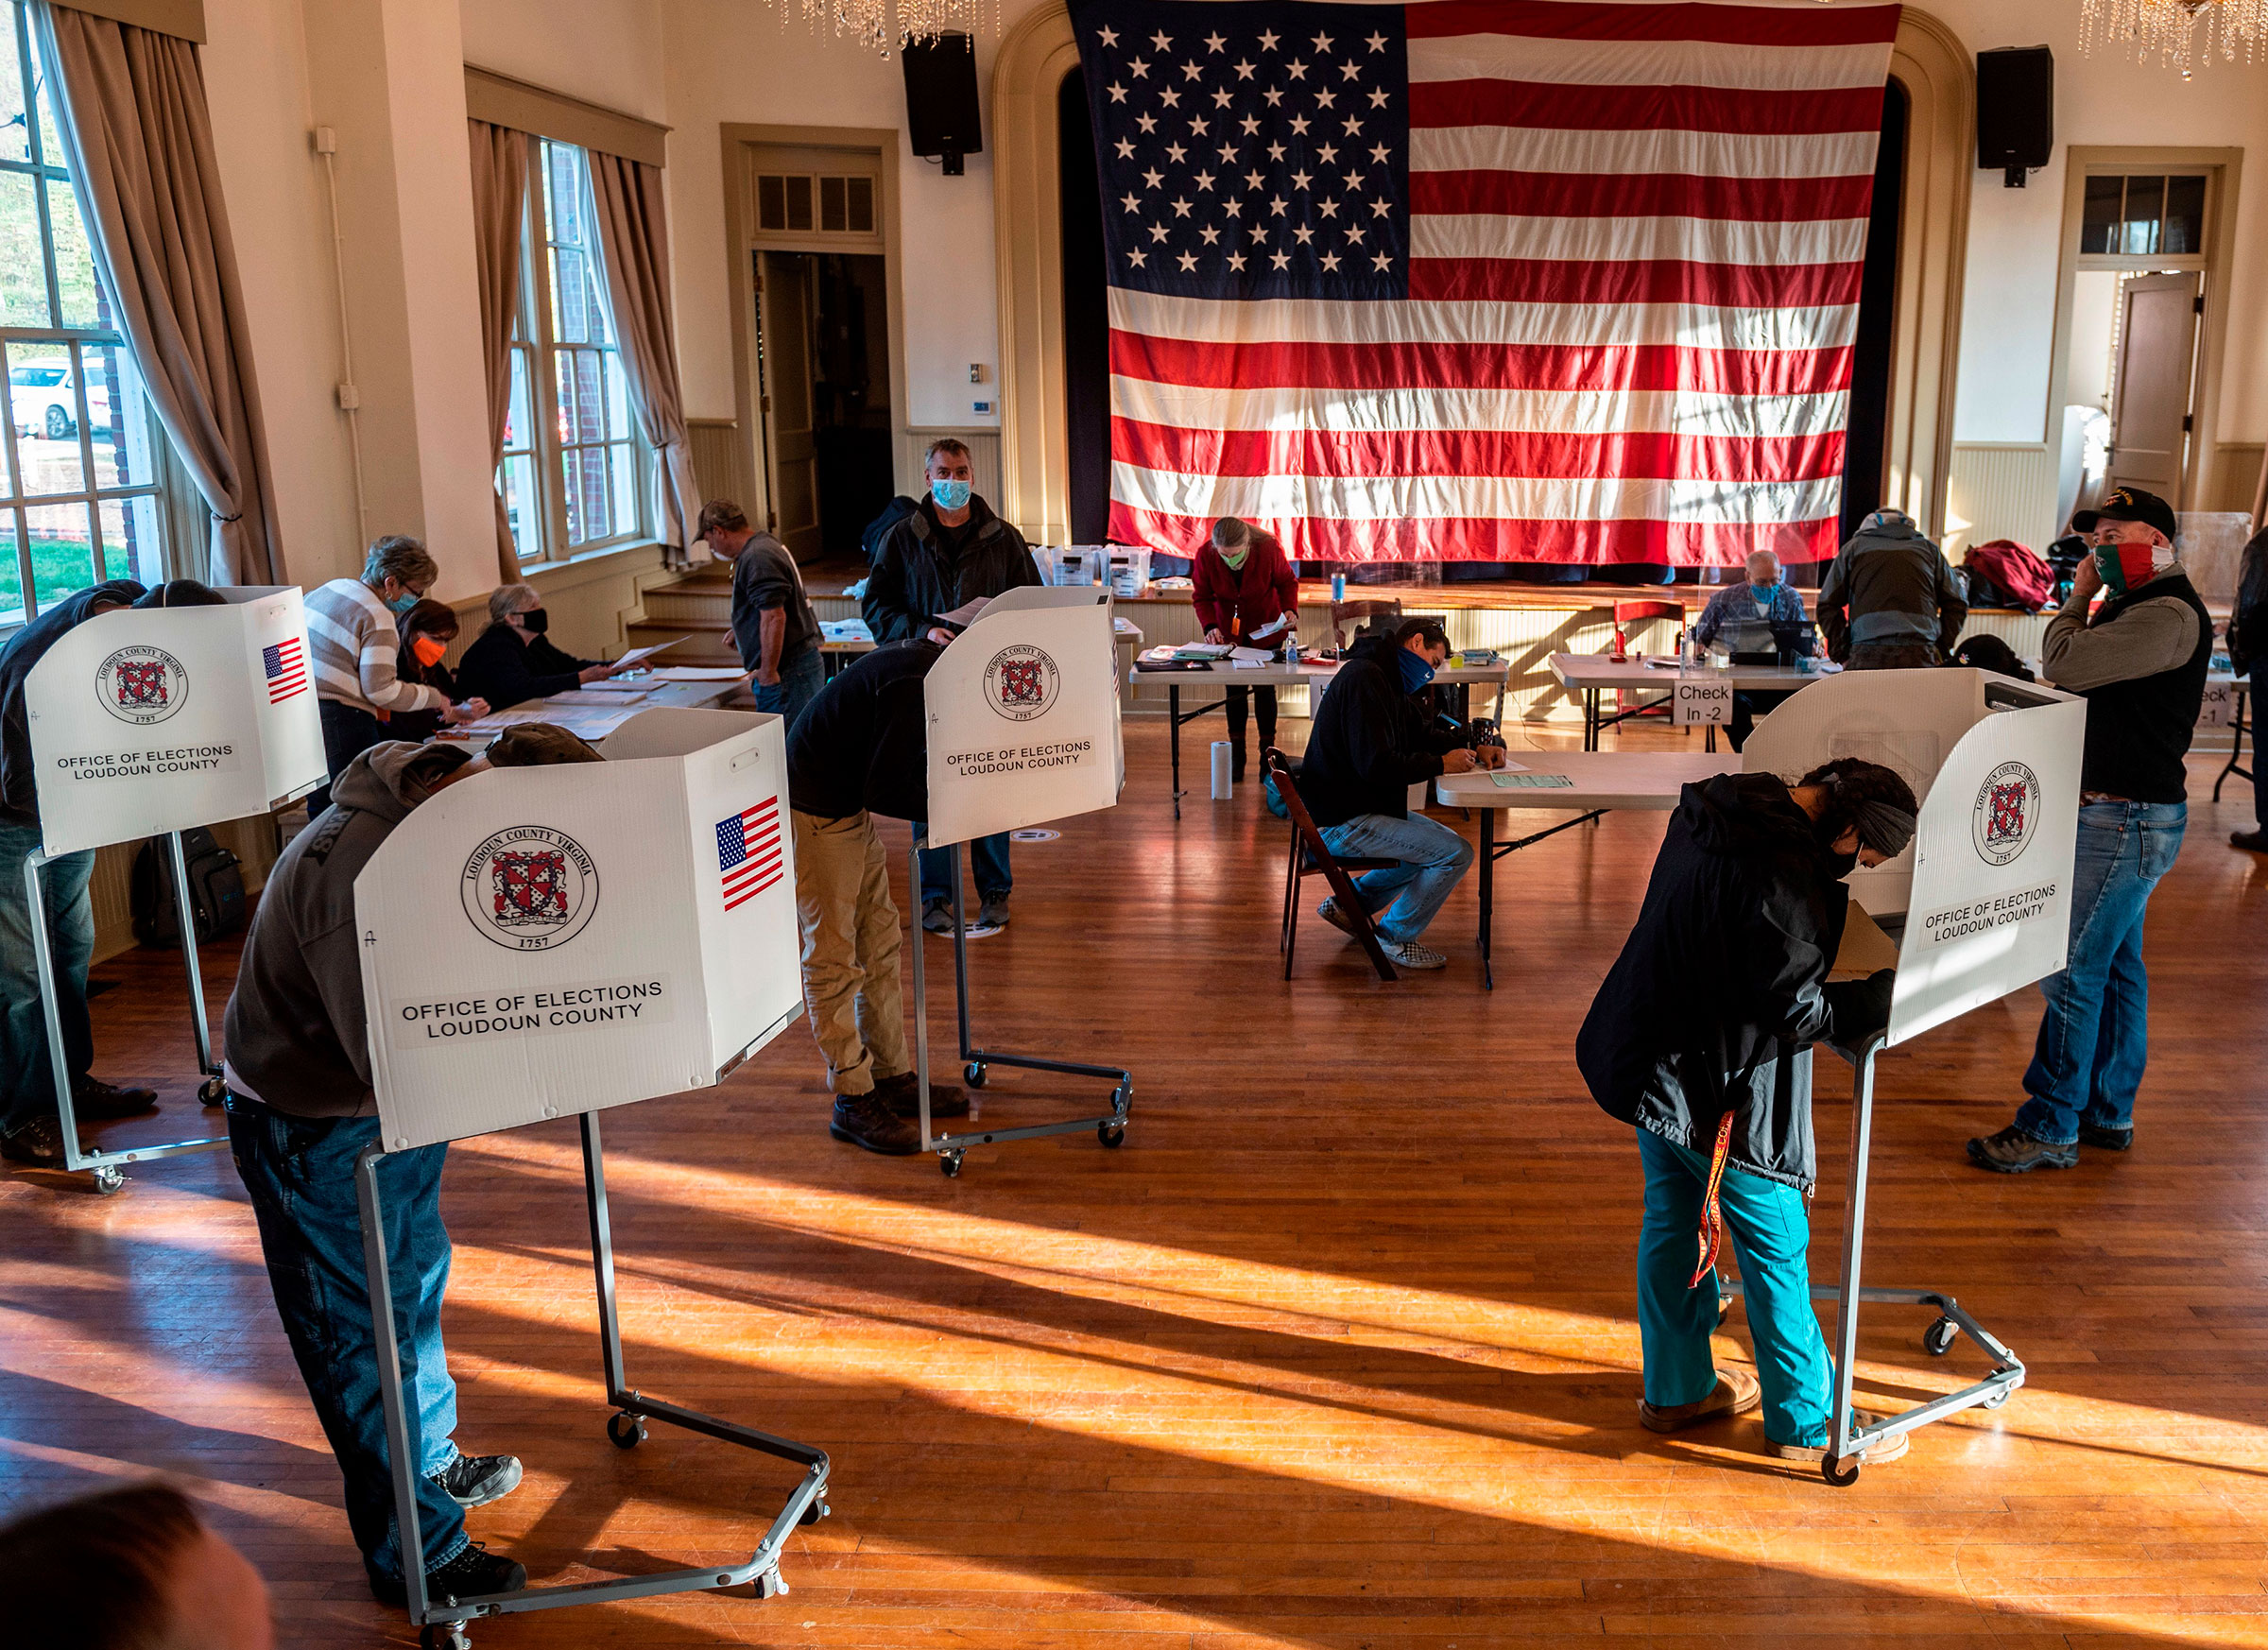 Voters cast their ballots at the old Stone School polling station, on election day in Hillsboro, Va. on Nov. 3, 2020. (Andrew Caballero-Reynolds—AFP/Getty Images)